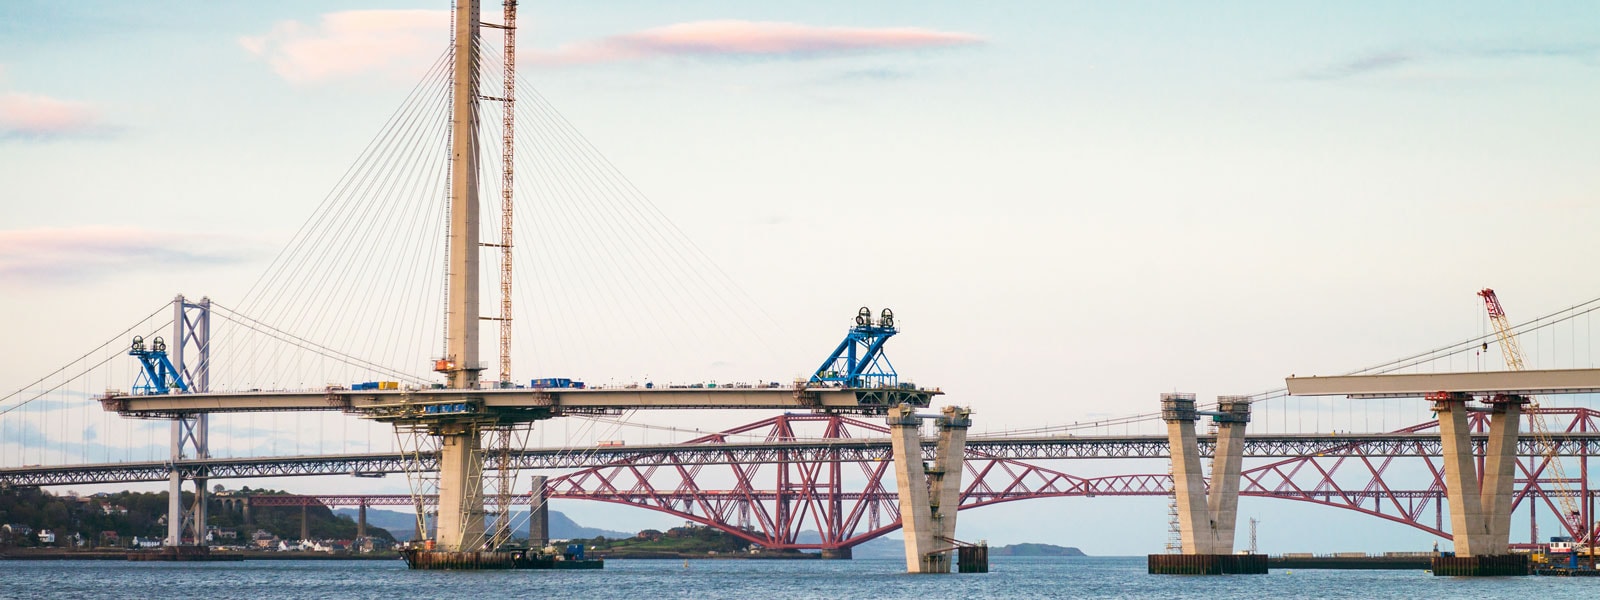 Construction in progress of the new bridge over the Firth of Forth, between Fife and the Lothians.